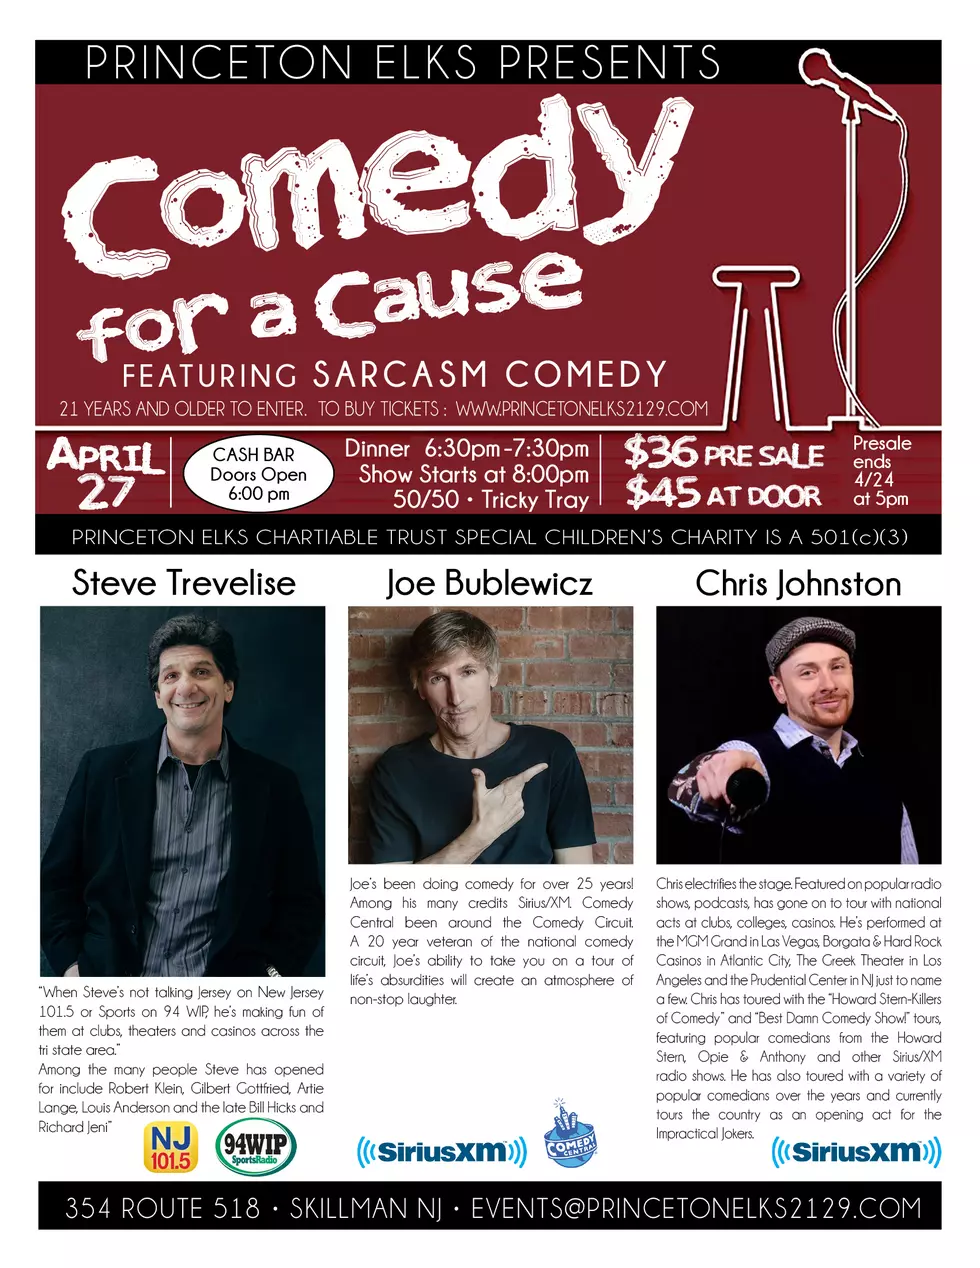 Princeton comedy fundraiser for kids with special needs